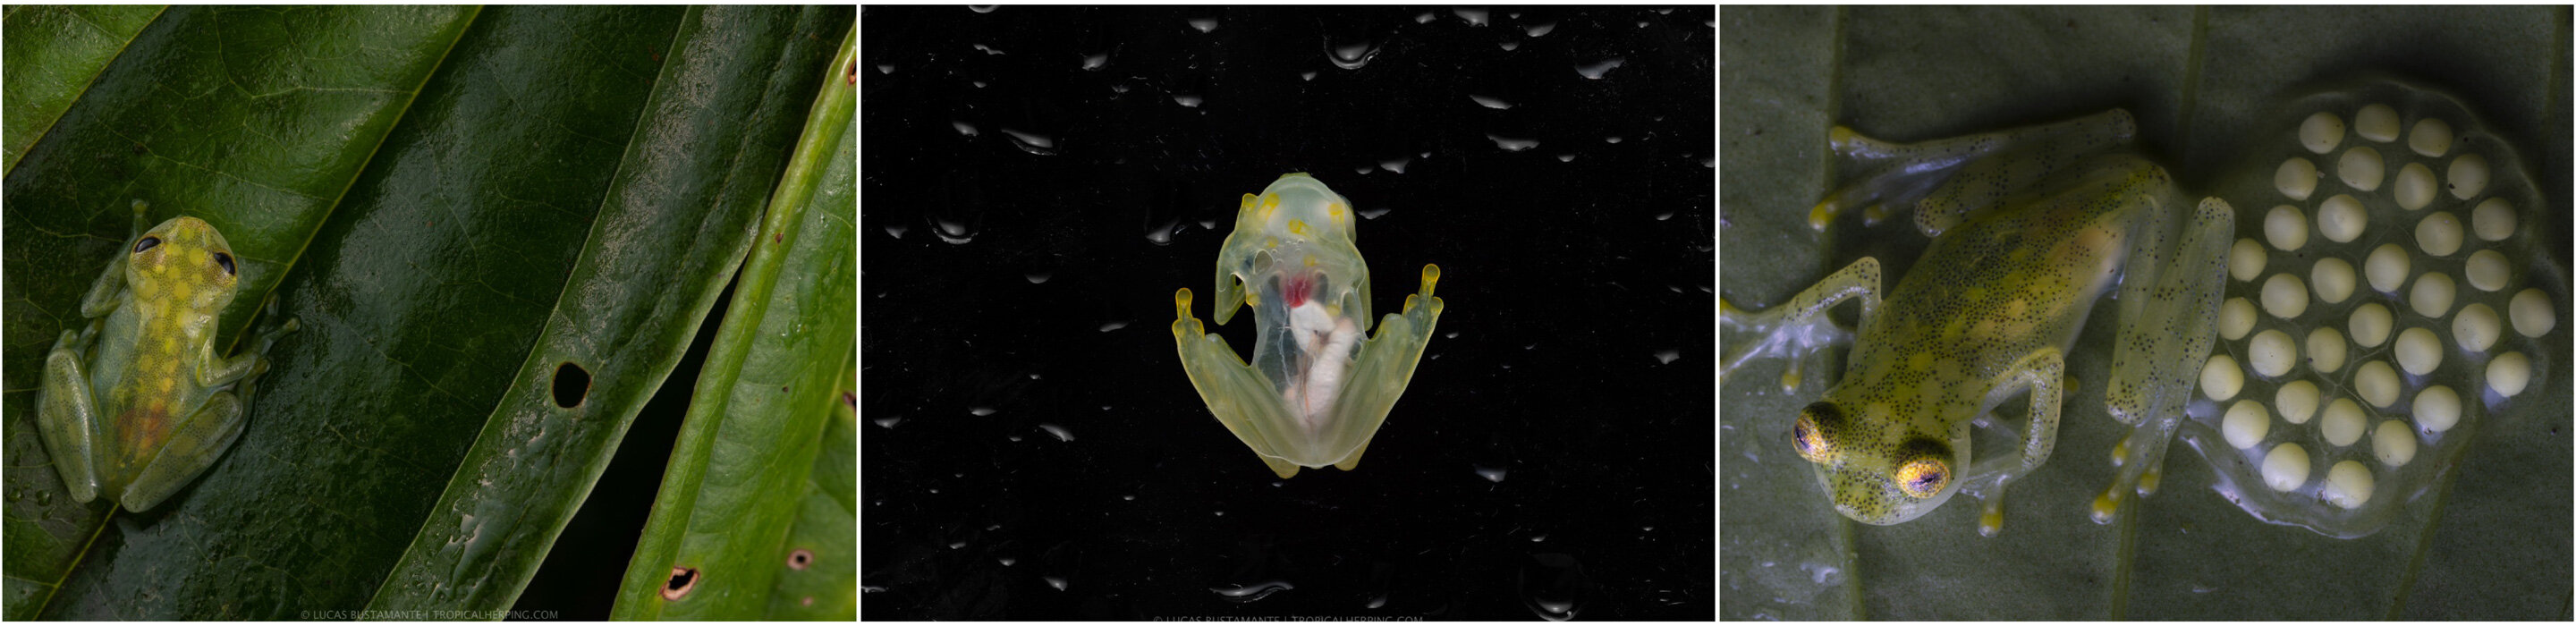 Two endangered glass frogs discovered near Andean mining sites